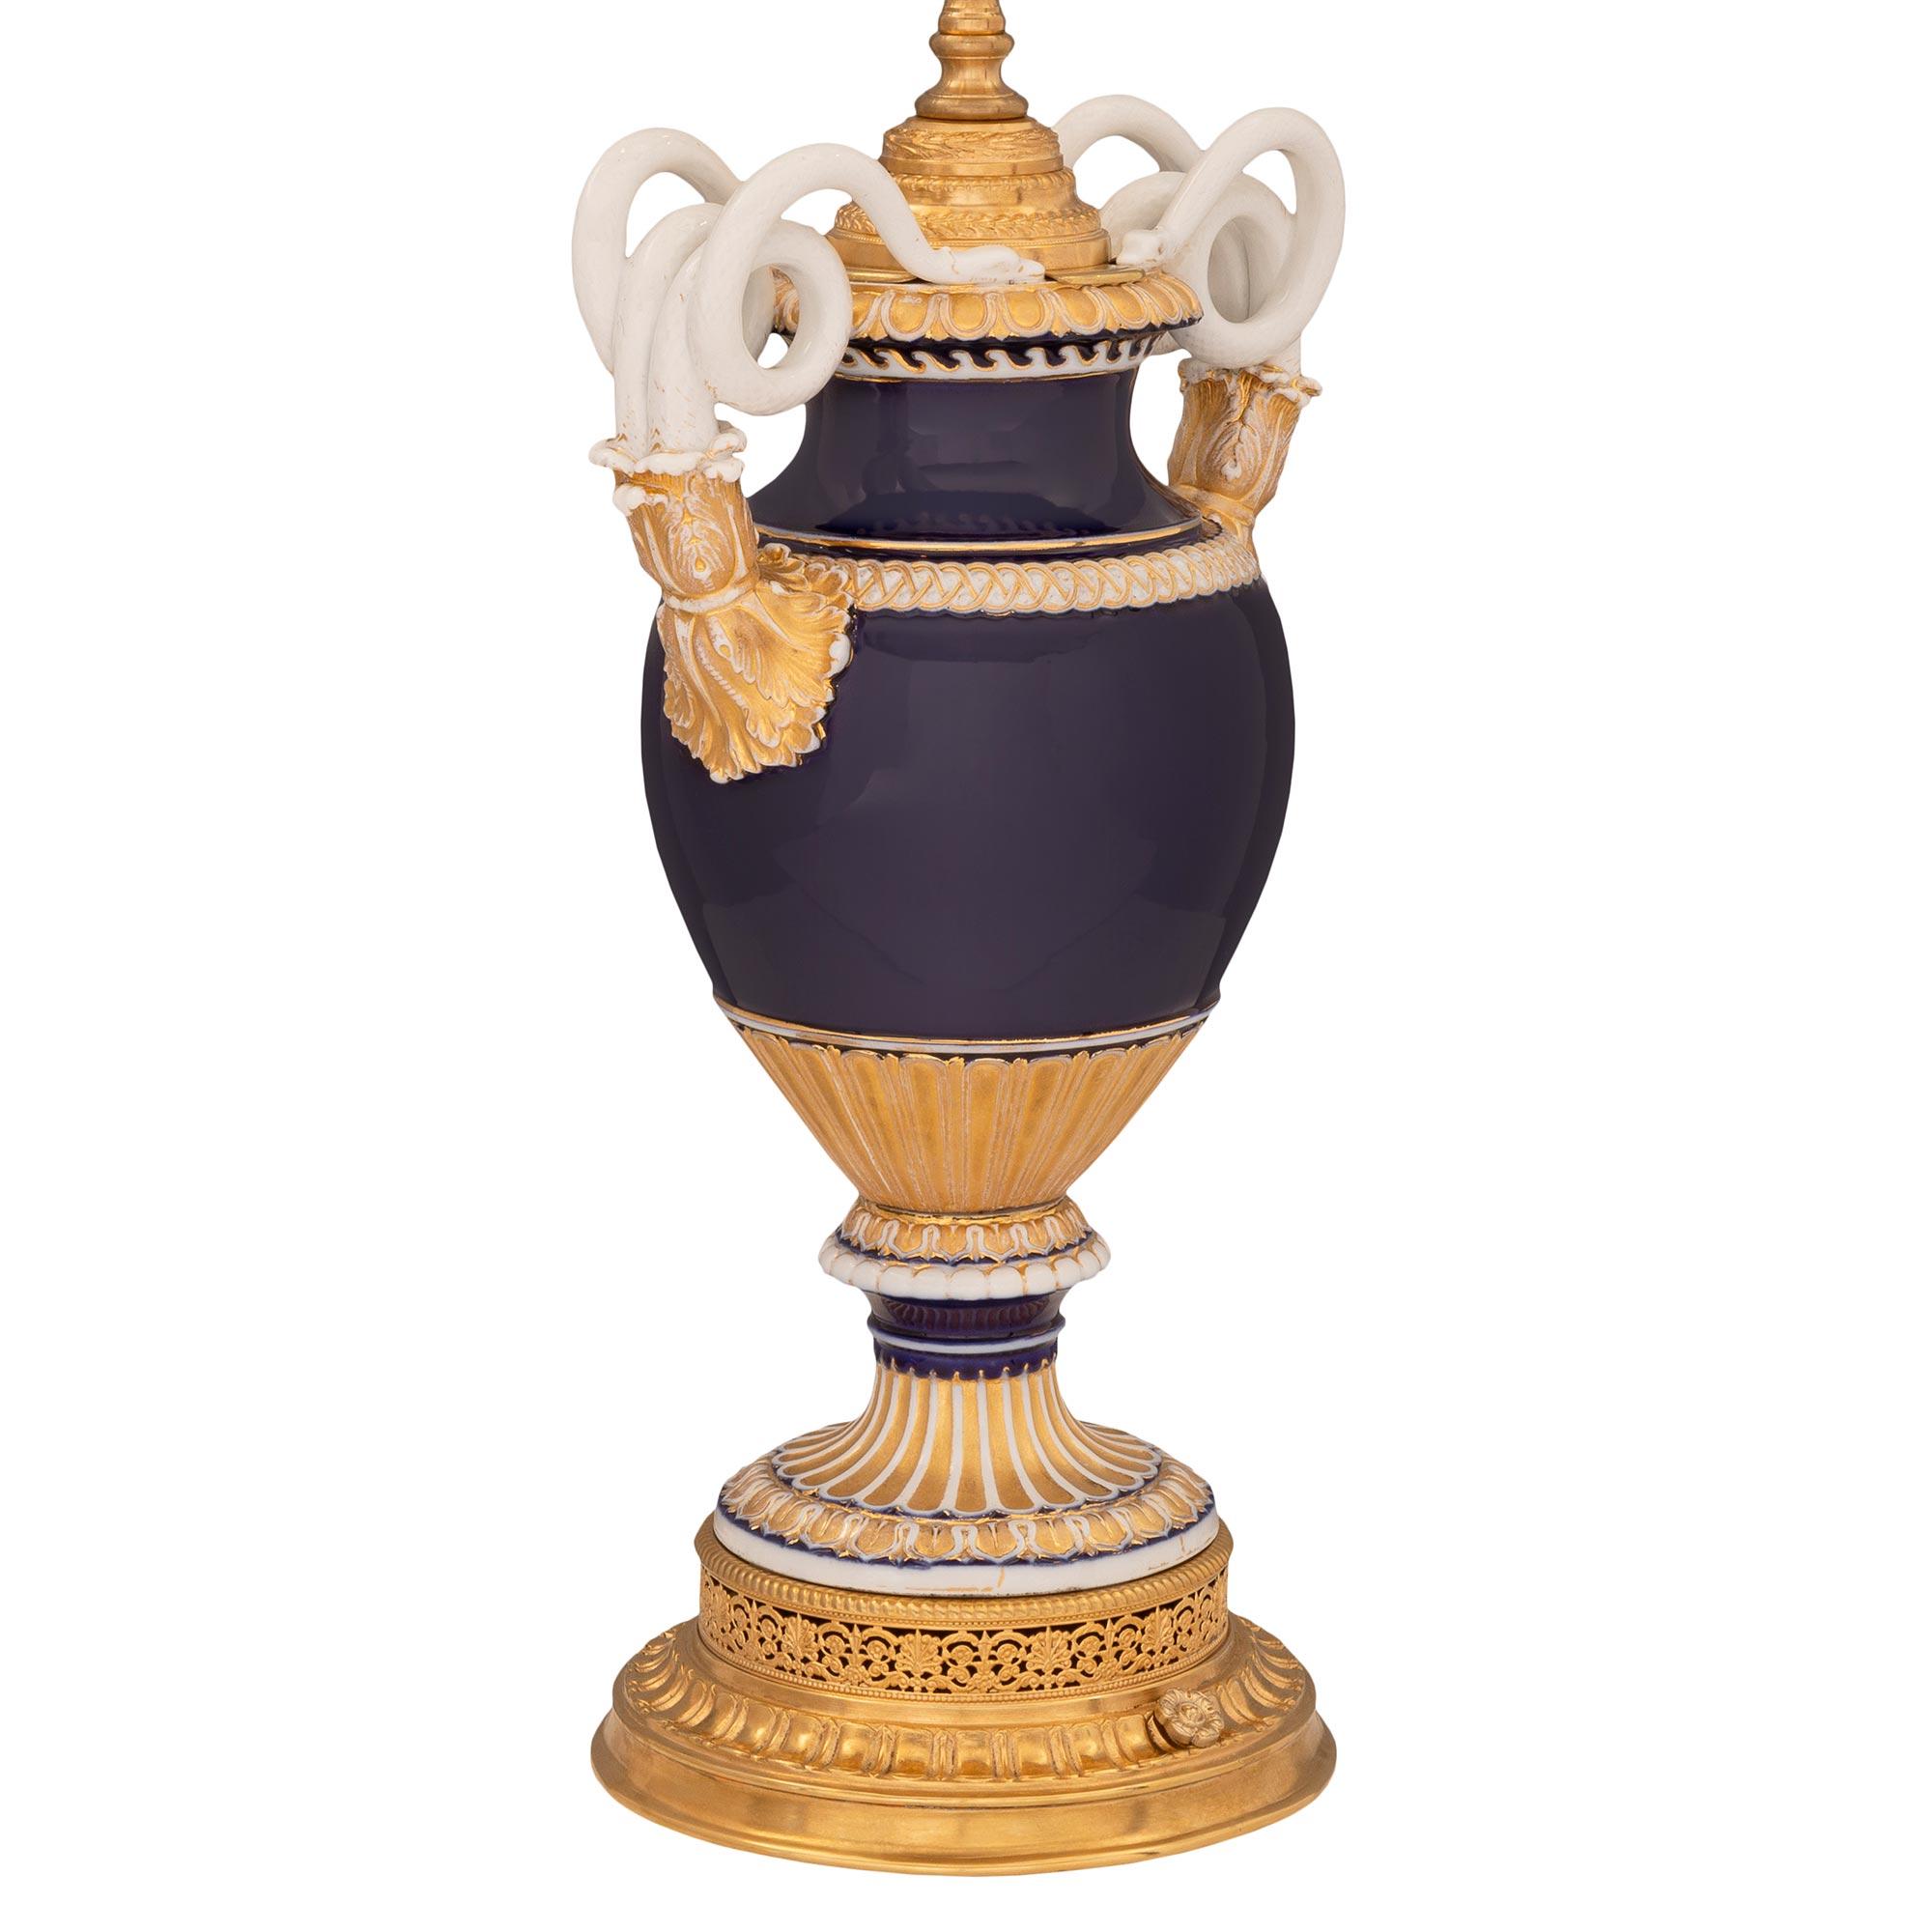 A lovely pair of French and German collaboration 19th century Meissen porcelain and ormolu urns mounted into lamps. Each beautiful lamp is raised by a most elegant circular base with a reeded wrap around band below a lovely intricately pierced